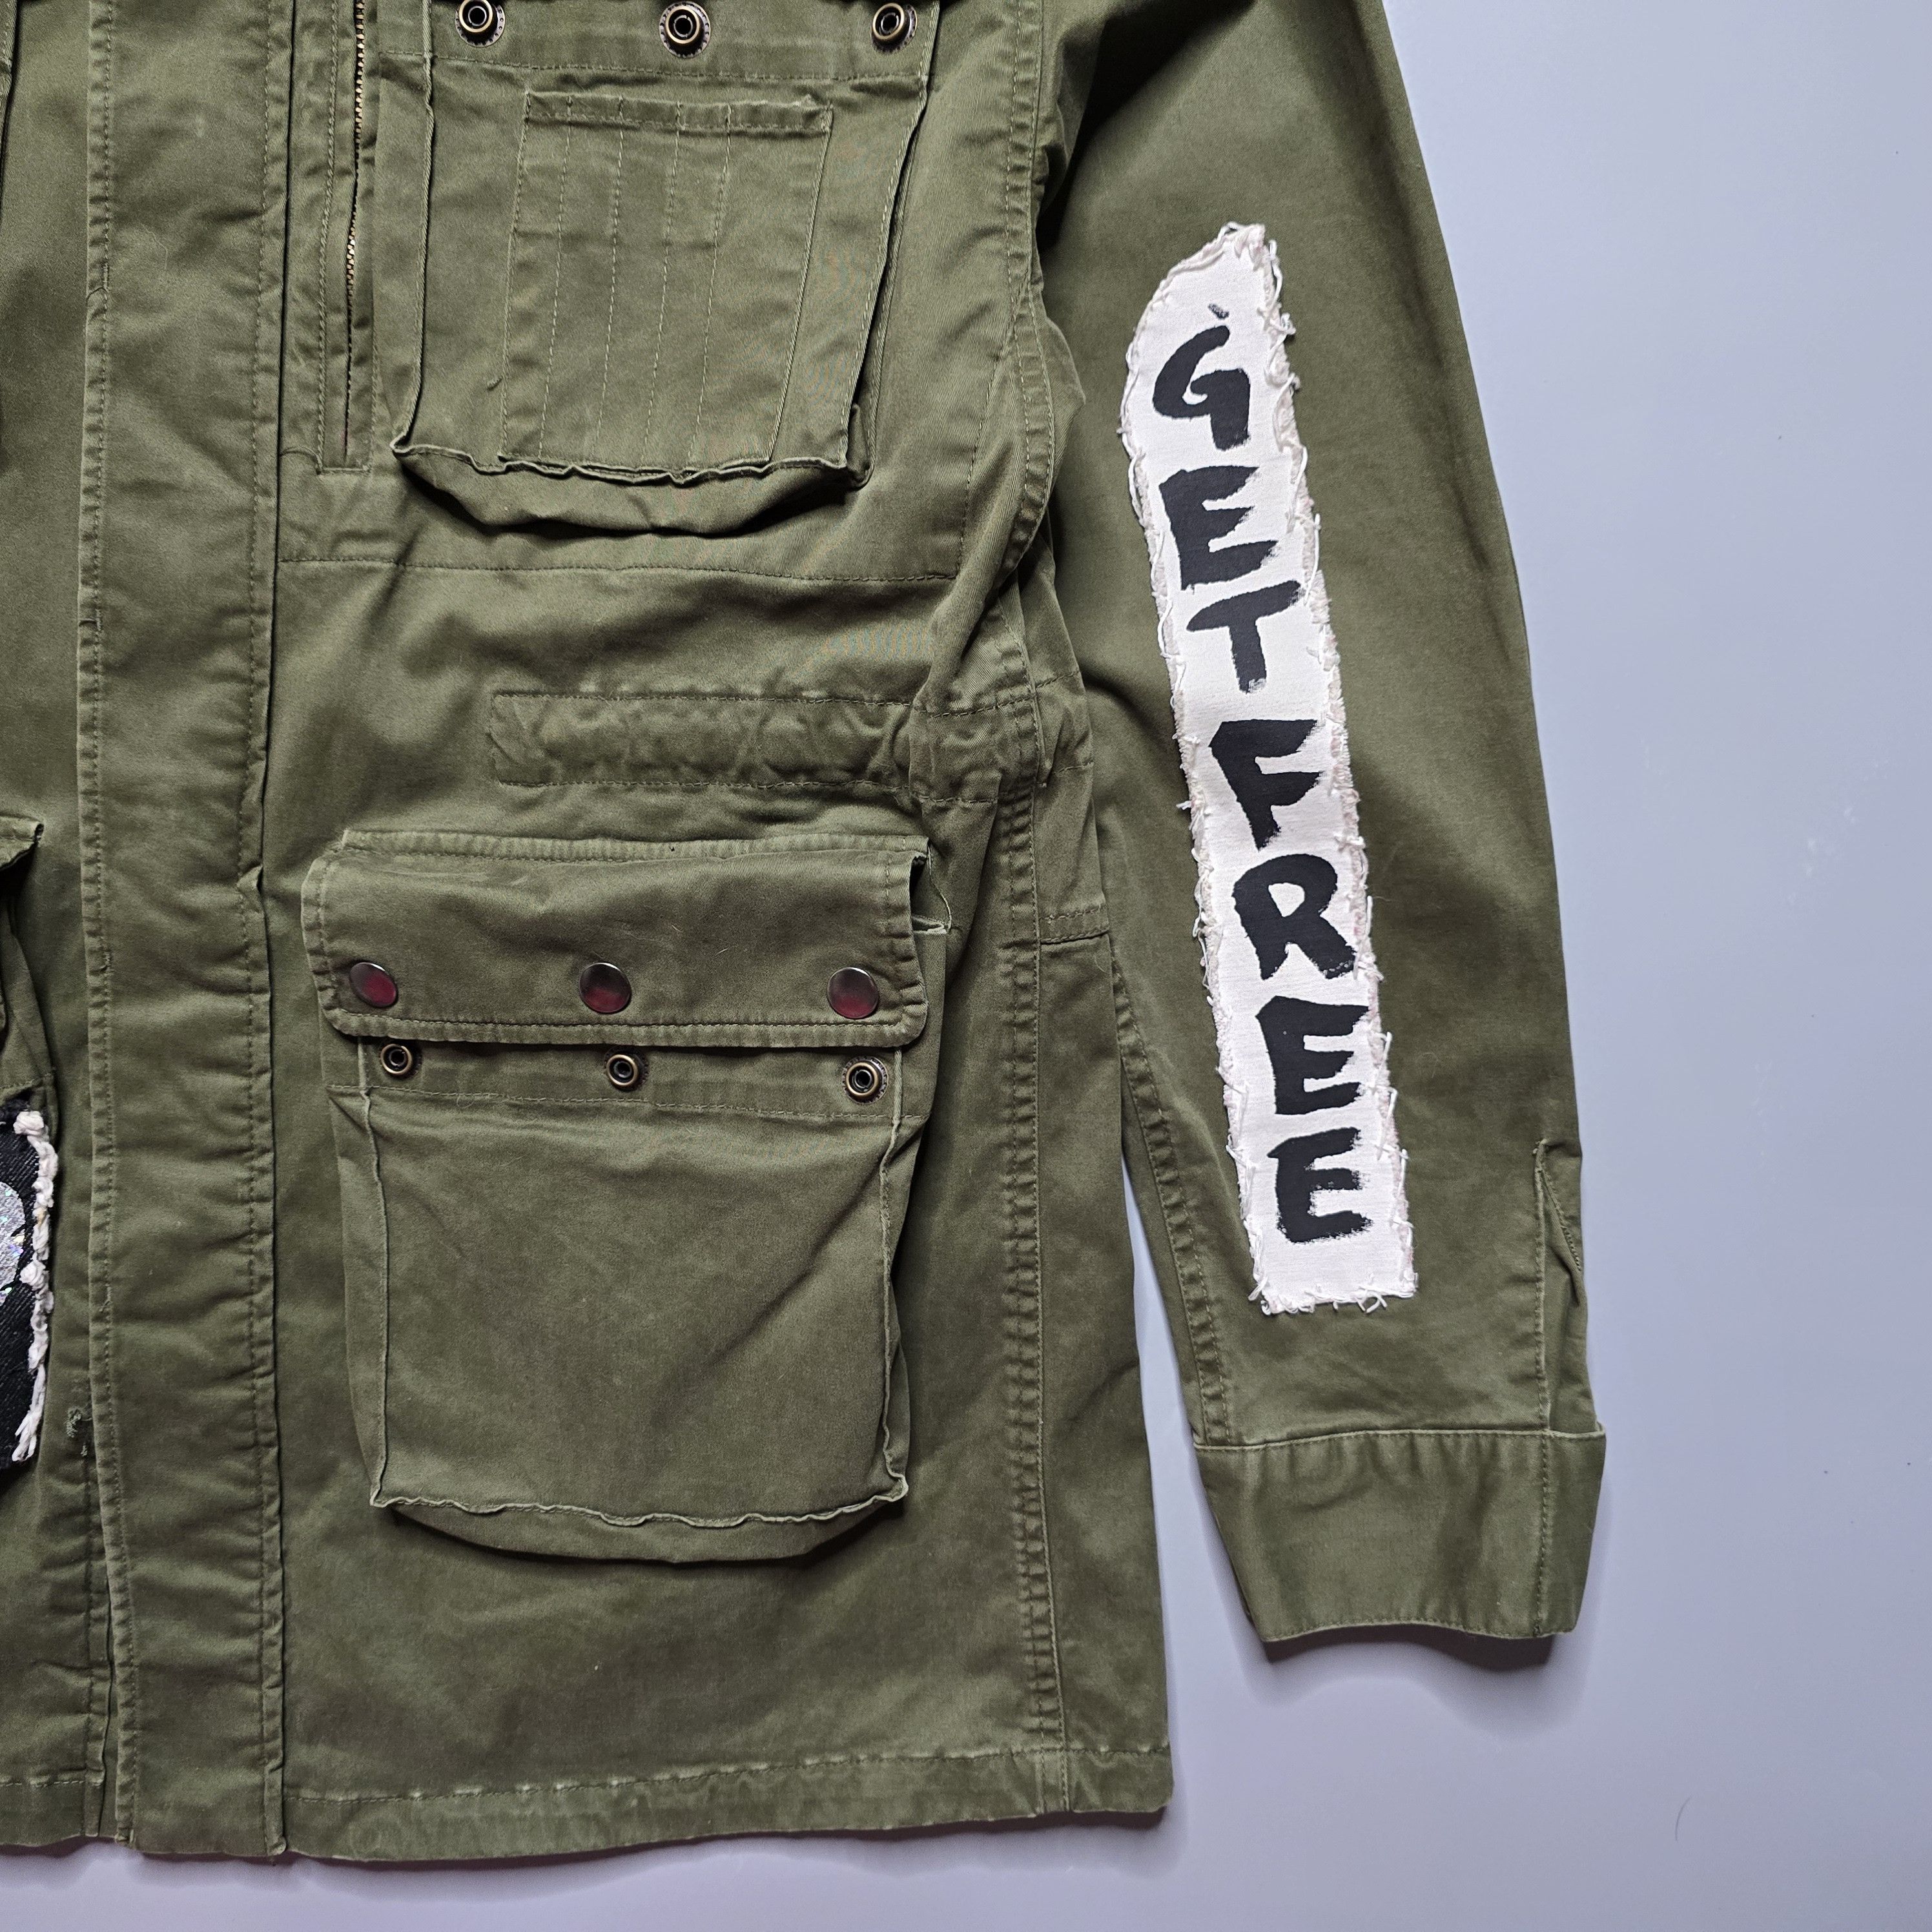 Faith Connexion - Hand-Painted Crown Tag M65 Field Jacket - 5